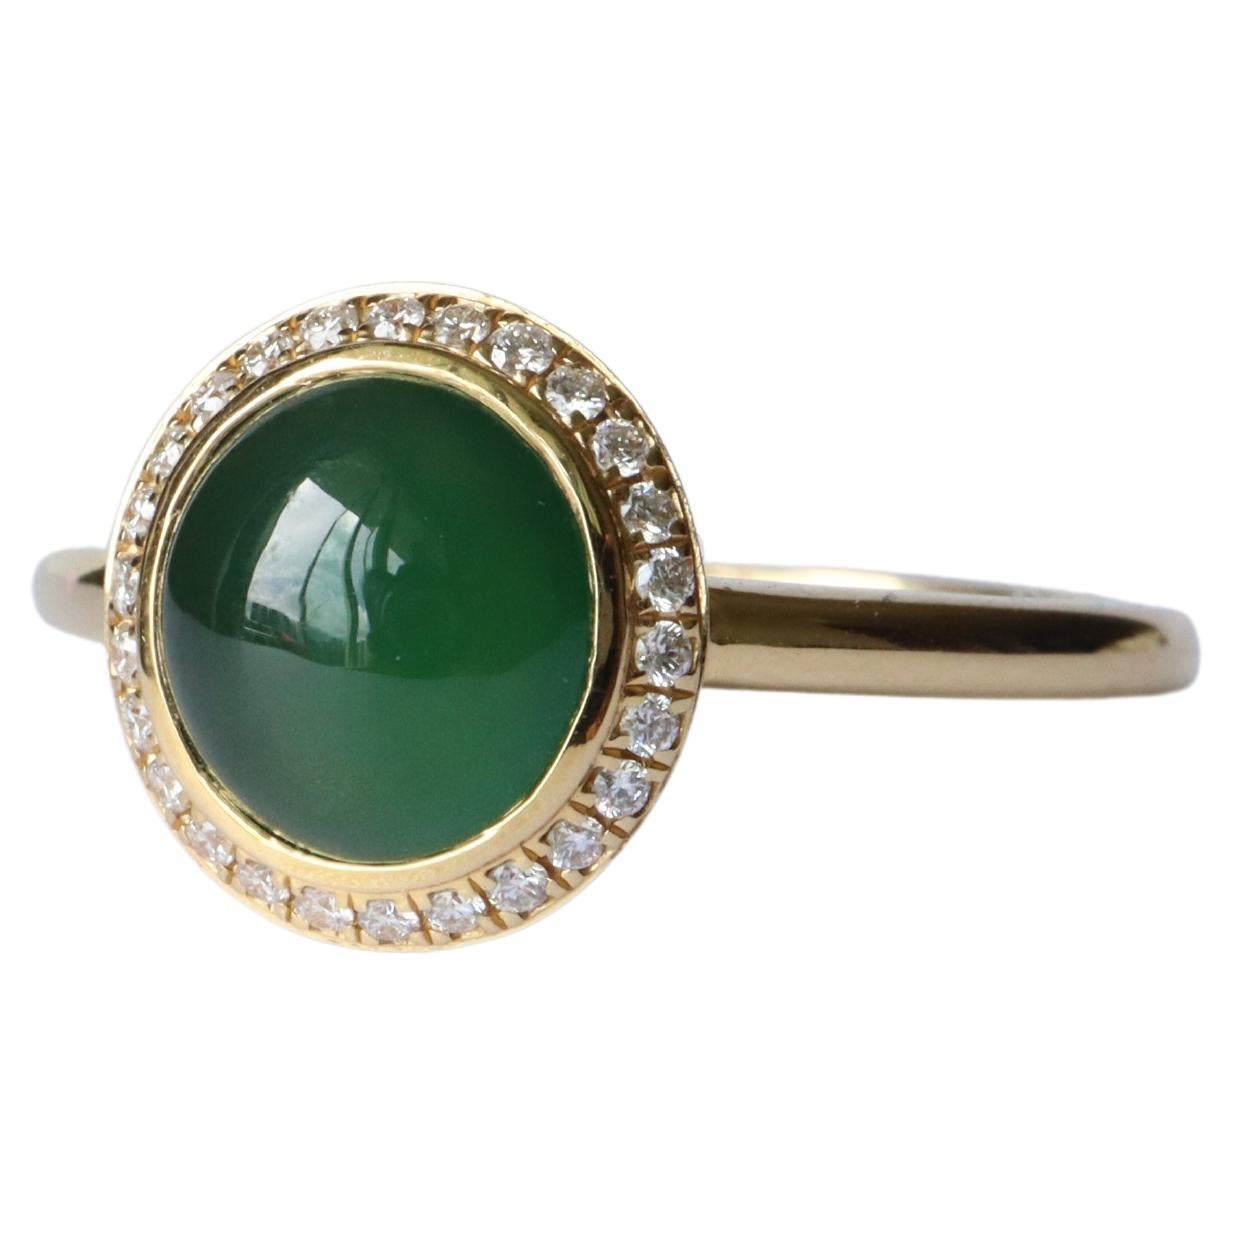 1.18Ct Burma Type A Jadeite Jade Ring in 18k solid gold For Sale